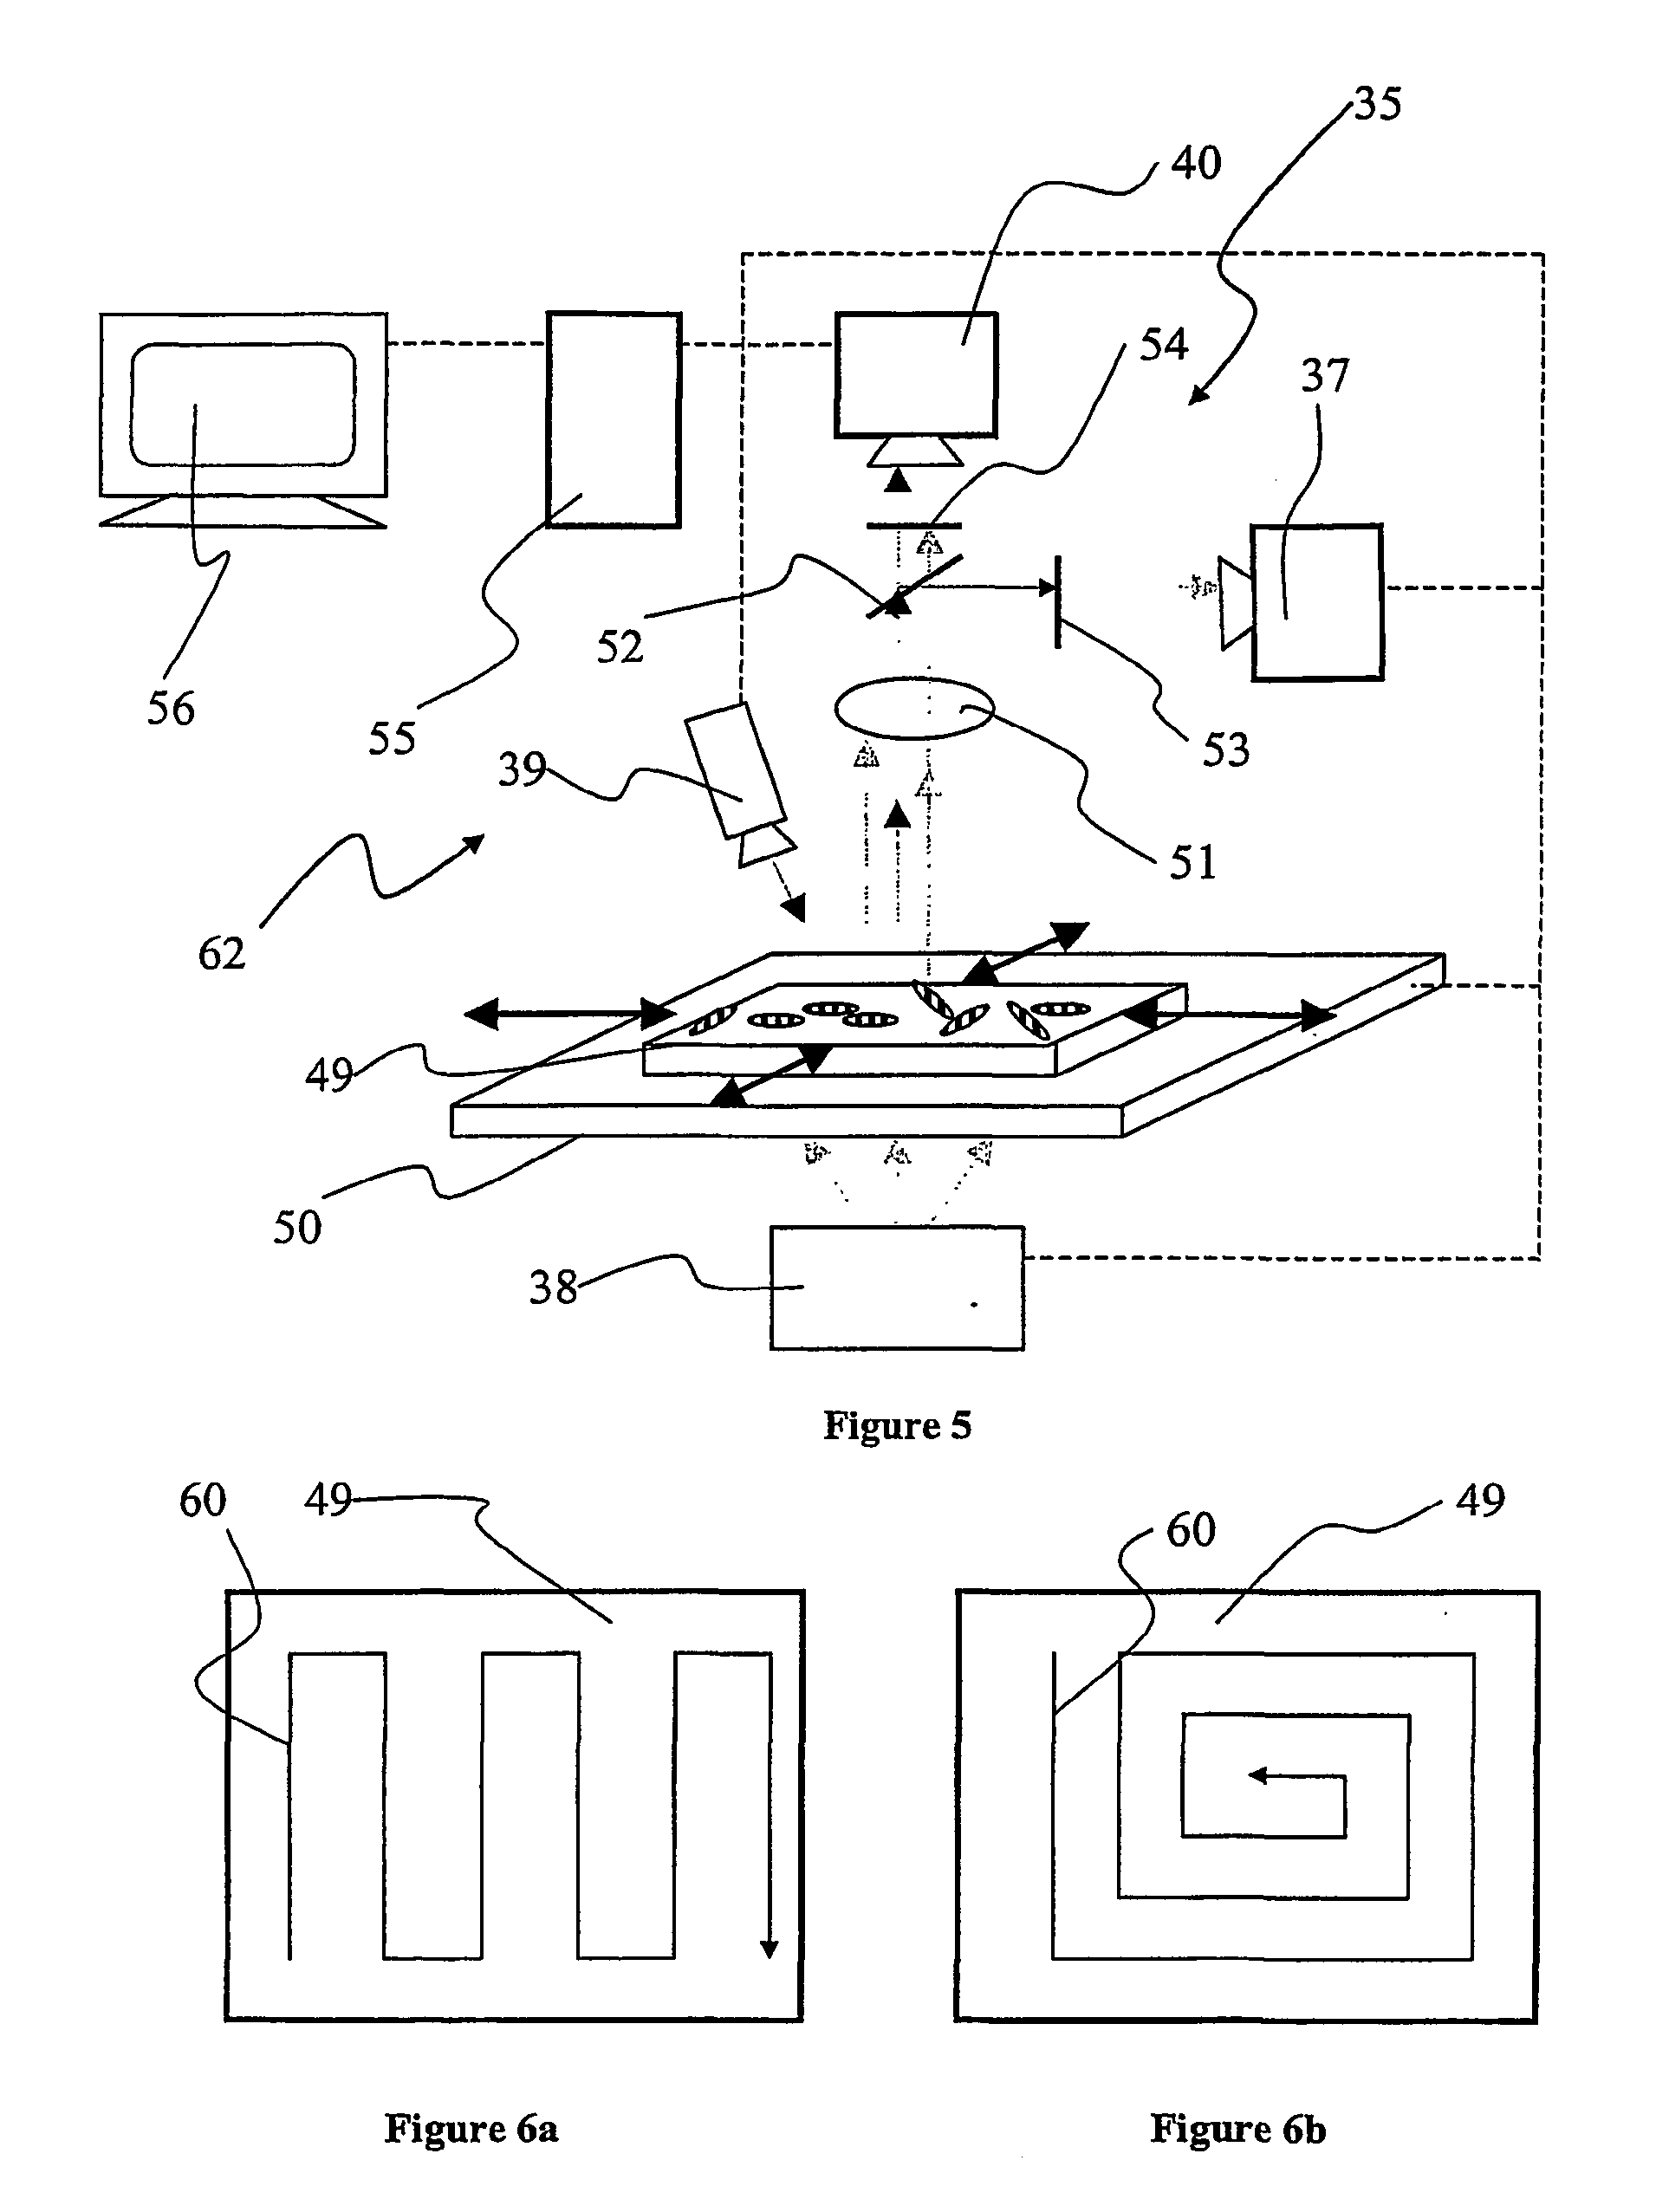 Biochemical method and apparatus for detecting protein characteristics